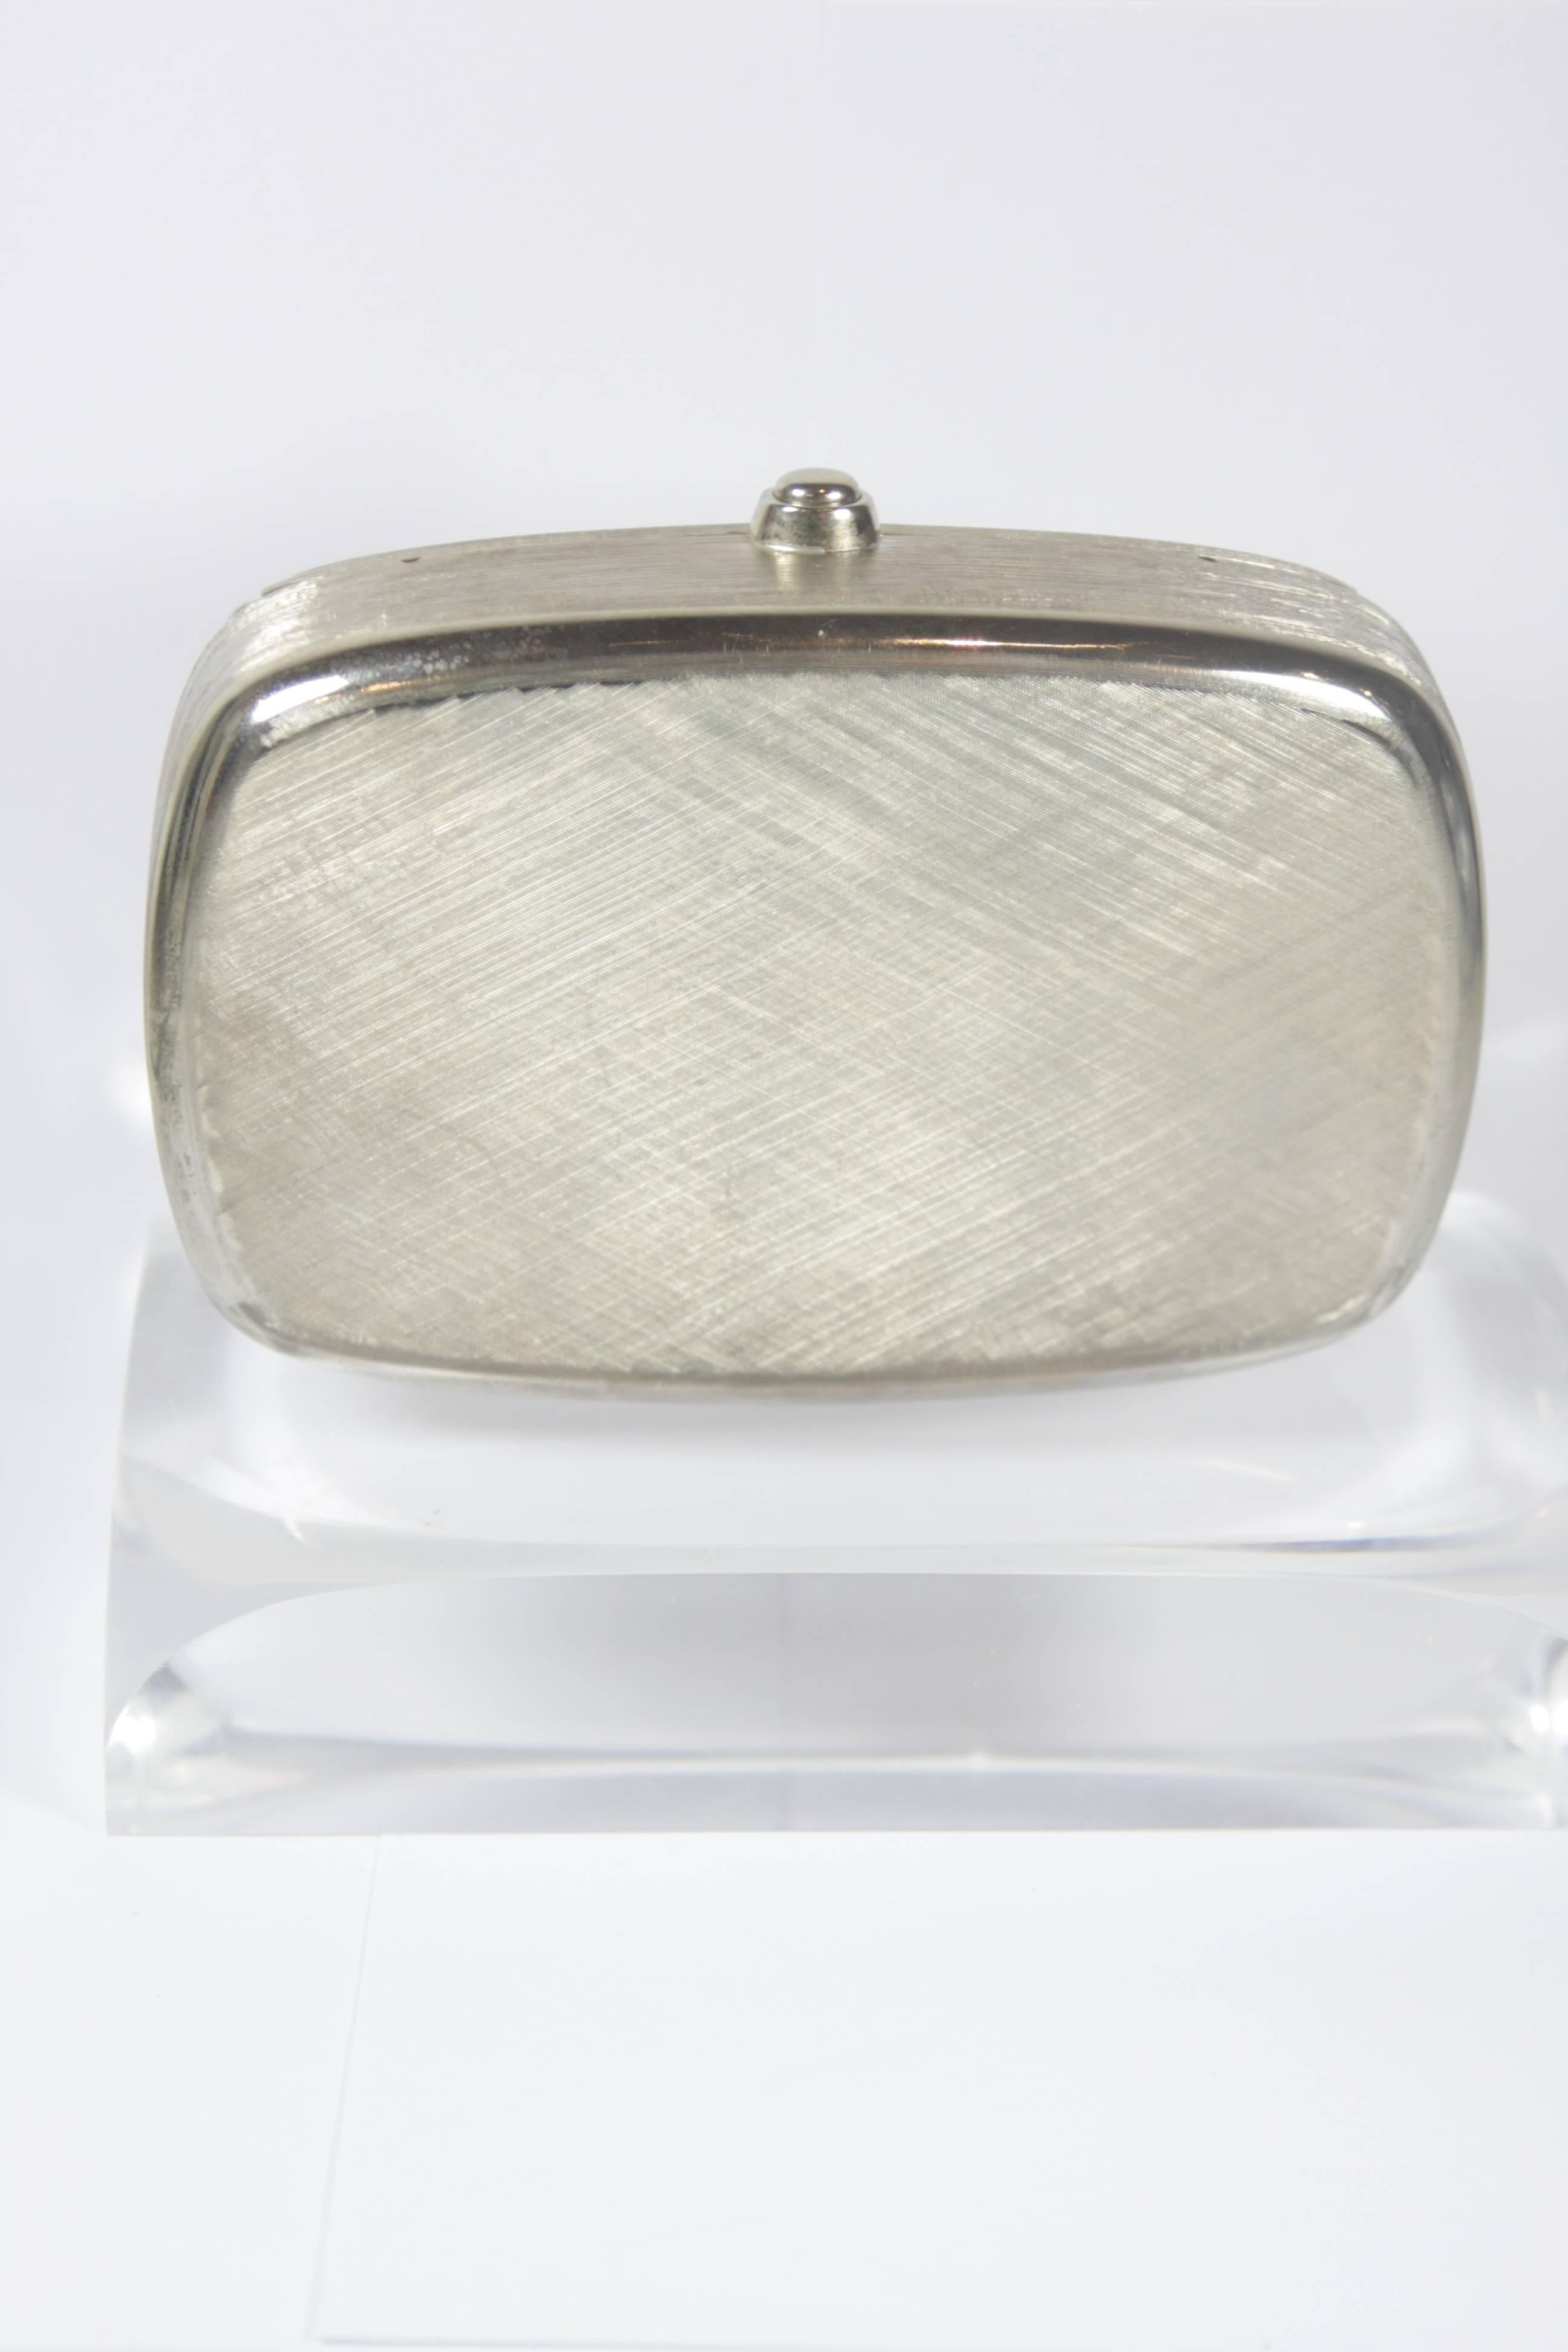  JUDITH LEIBER Brushed Metal Evening Purse with Stone Details Optional Strap For Sale 2